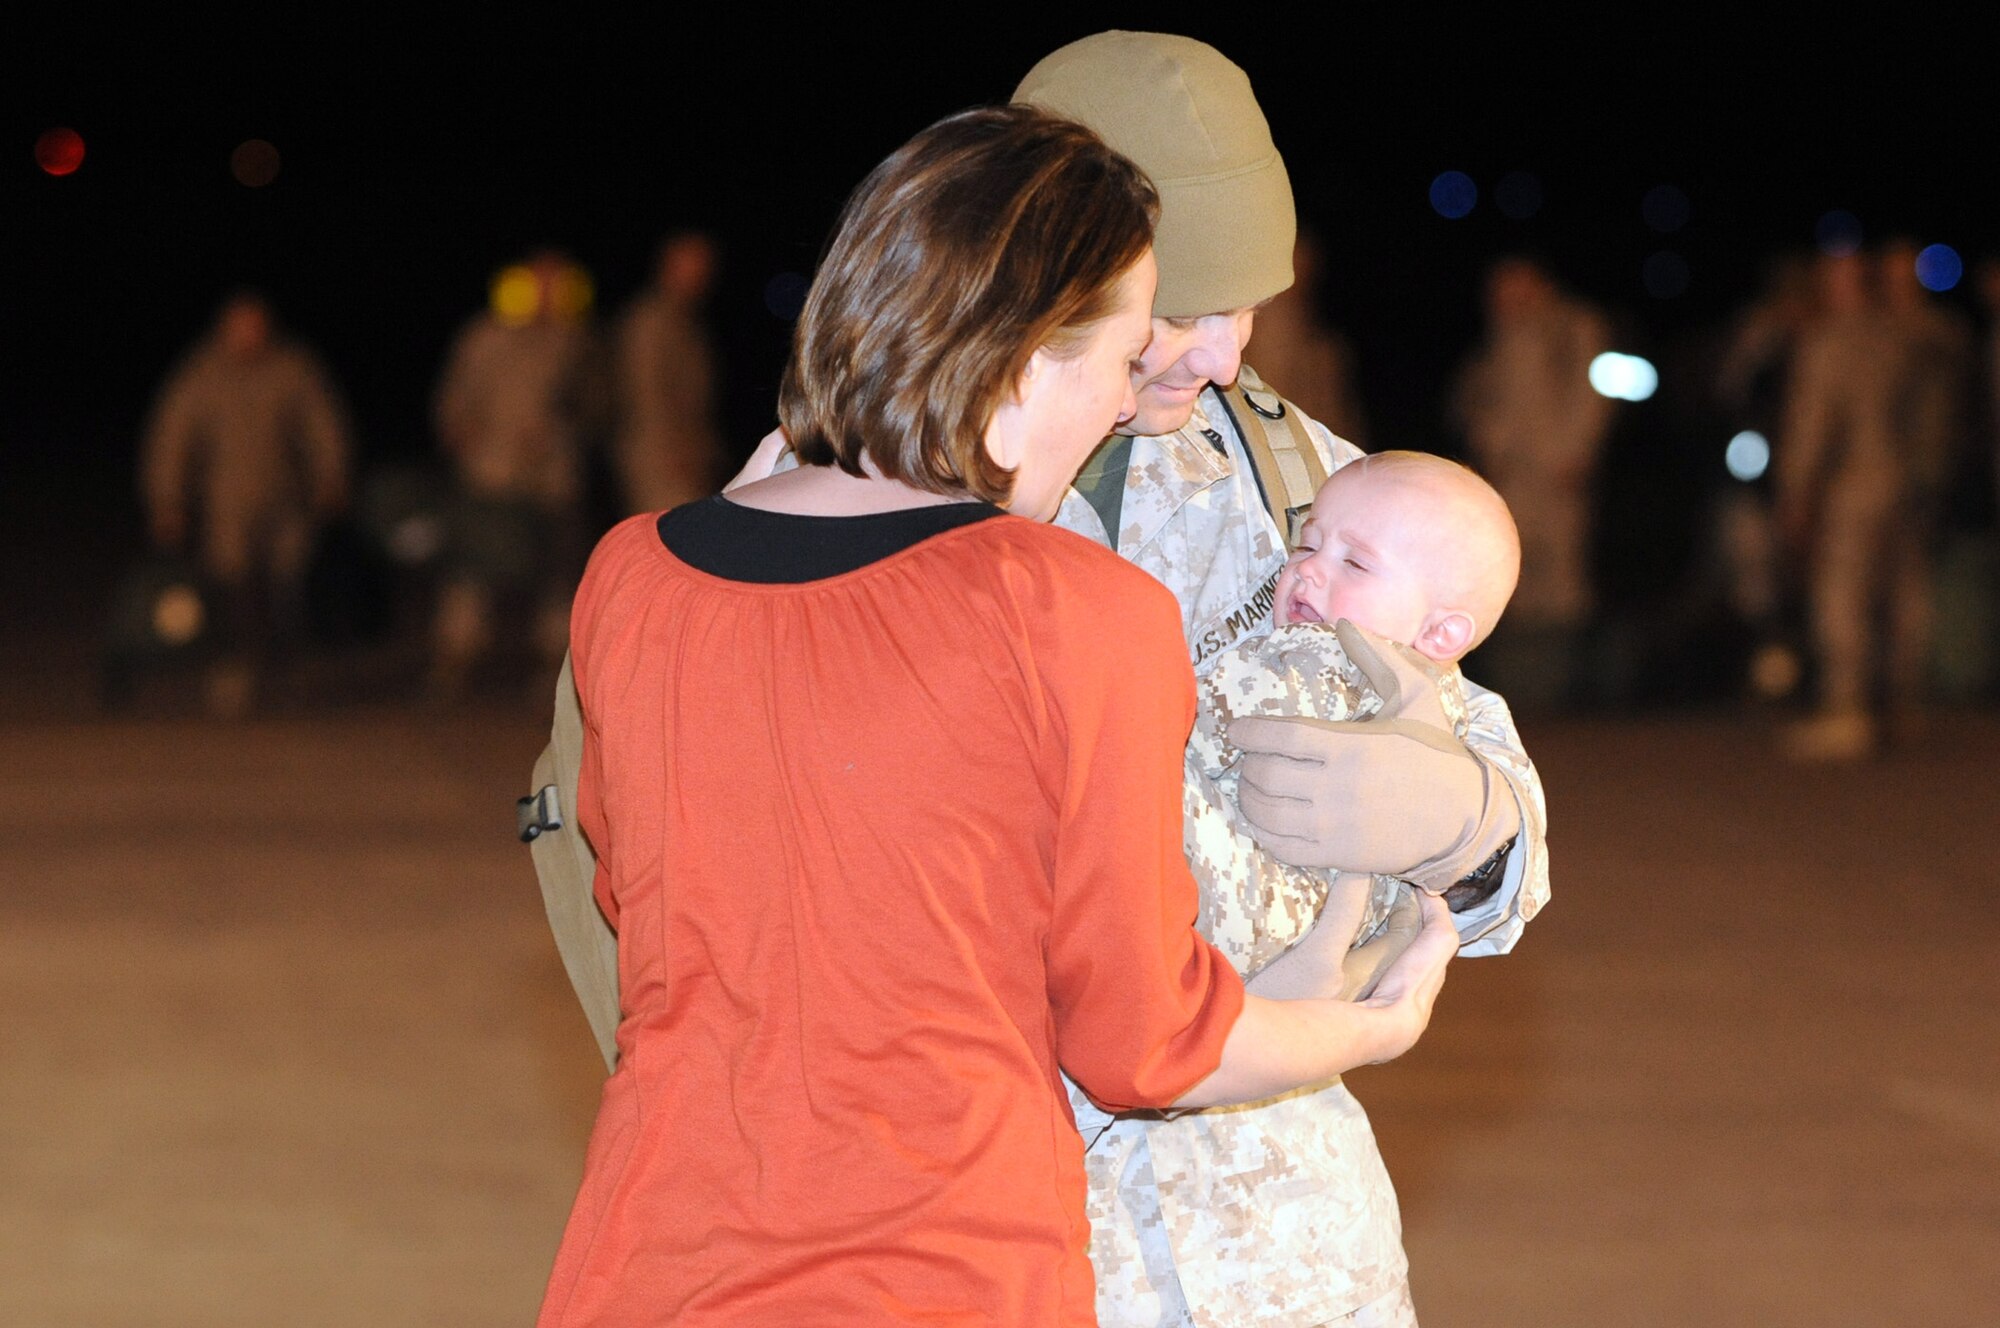 BUCKLEY AIR FORCE BASE, Colo. -- Michelle Figler welcomes home her husband Sgt. Josh Figler. This was his first time holding his son Ryder. The Marines returned to Hangar 909 here, Jan. 31, from a seven month deployment to the Anbar Province, Iraq, where they performed tactical air operations. (U.S. Air Force photo by Senior Airman Christopher Bush)